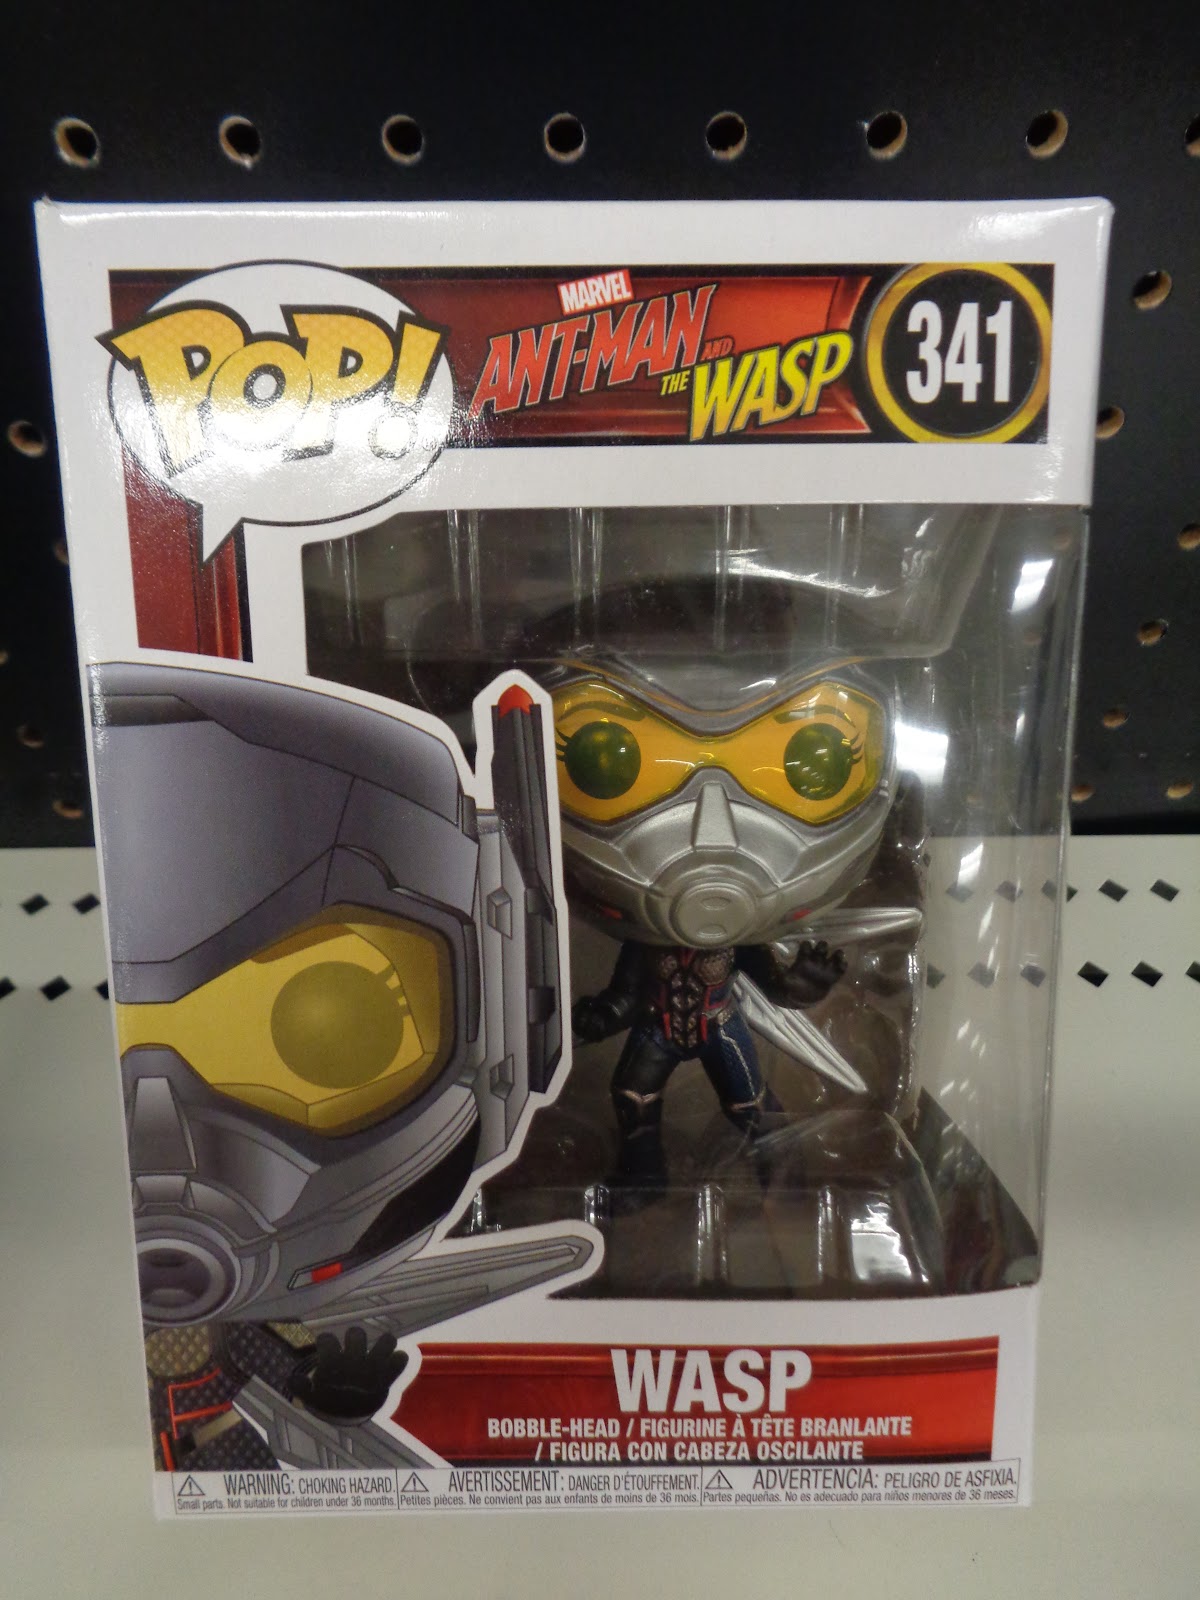 J And J Toys: Funko Pop! Ant-man & The Wasp